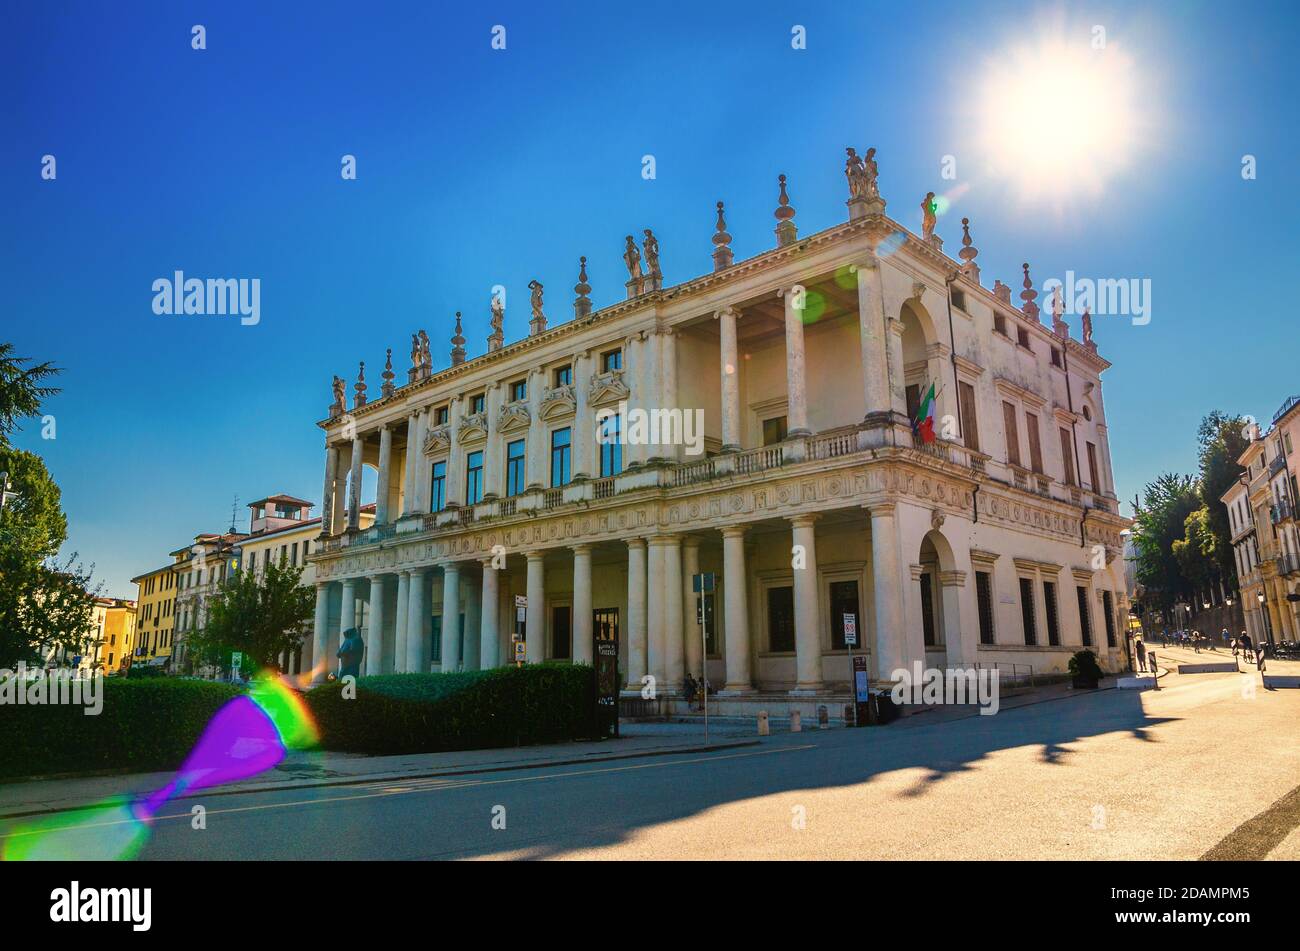 Vicenza, Italy, September 12, 2019: Civic Art Gallery museum of Palazzo Chiericati palace building with columns, Piazza Matteotti square, historical city centre, sun light background, Veneto region Stock Photo